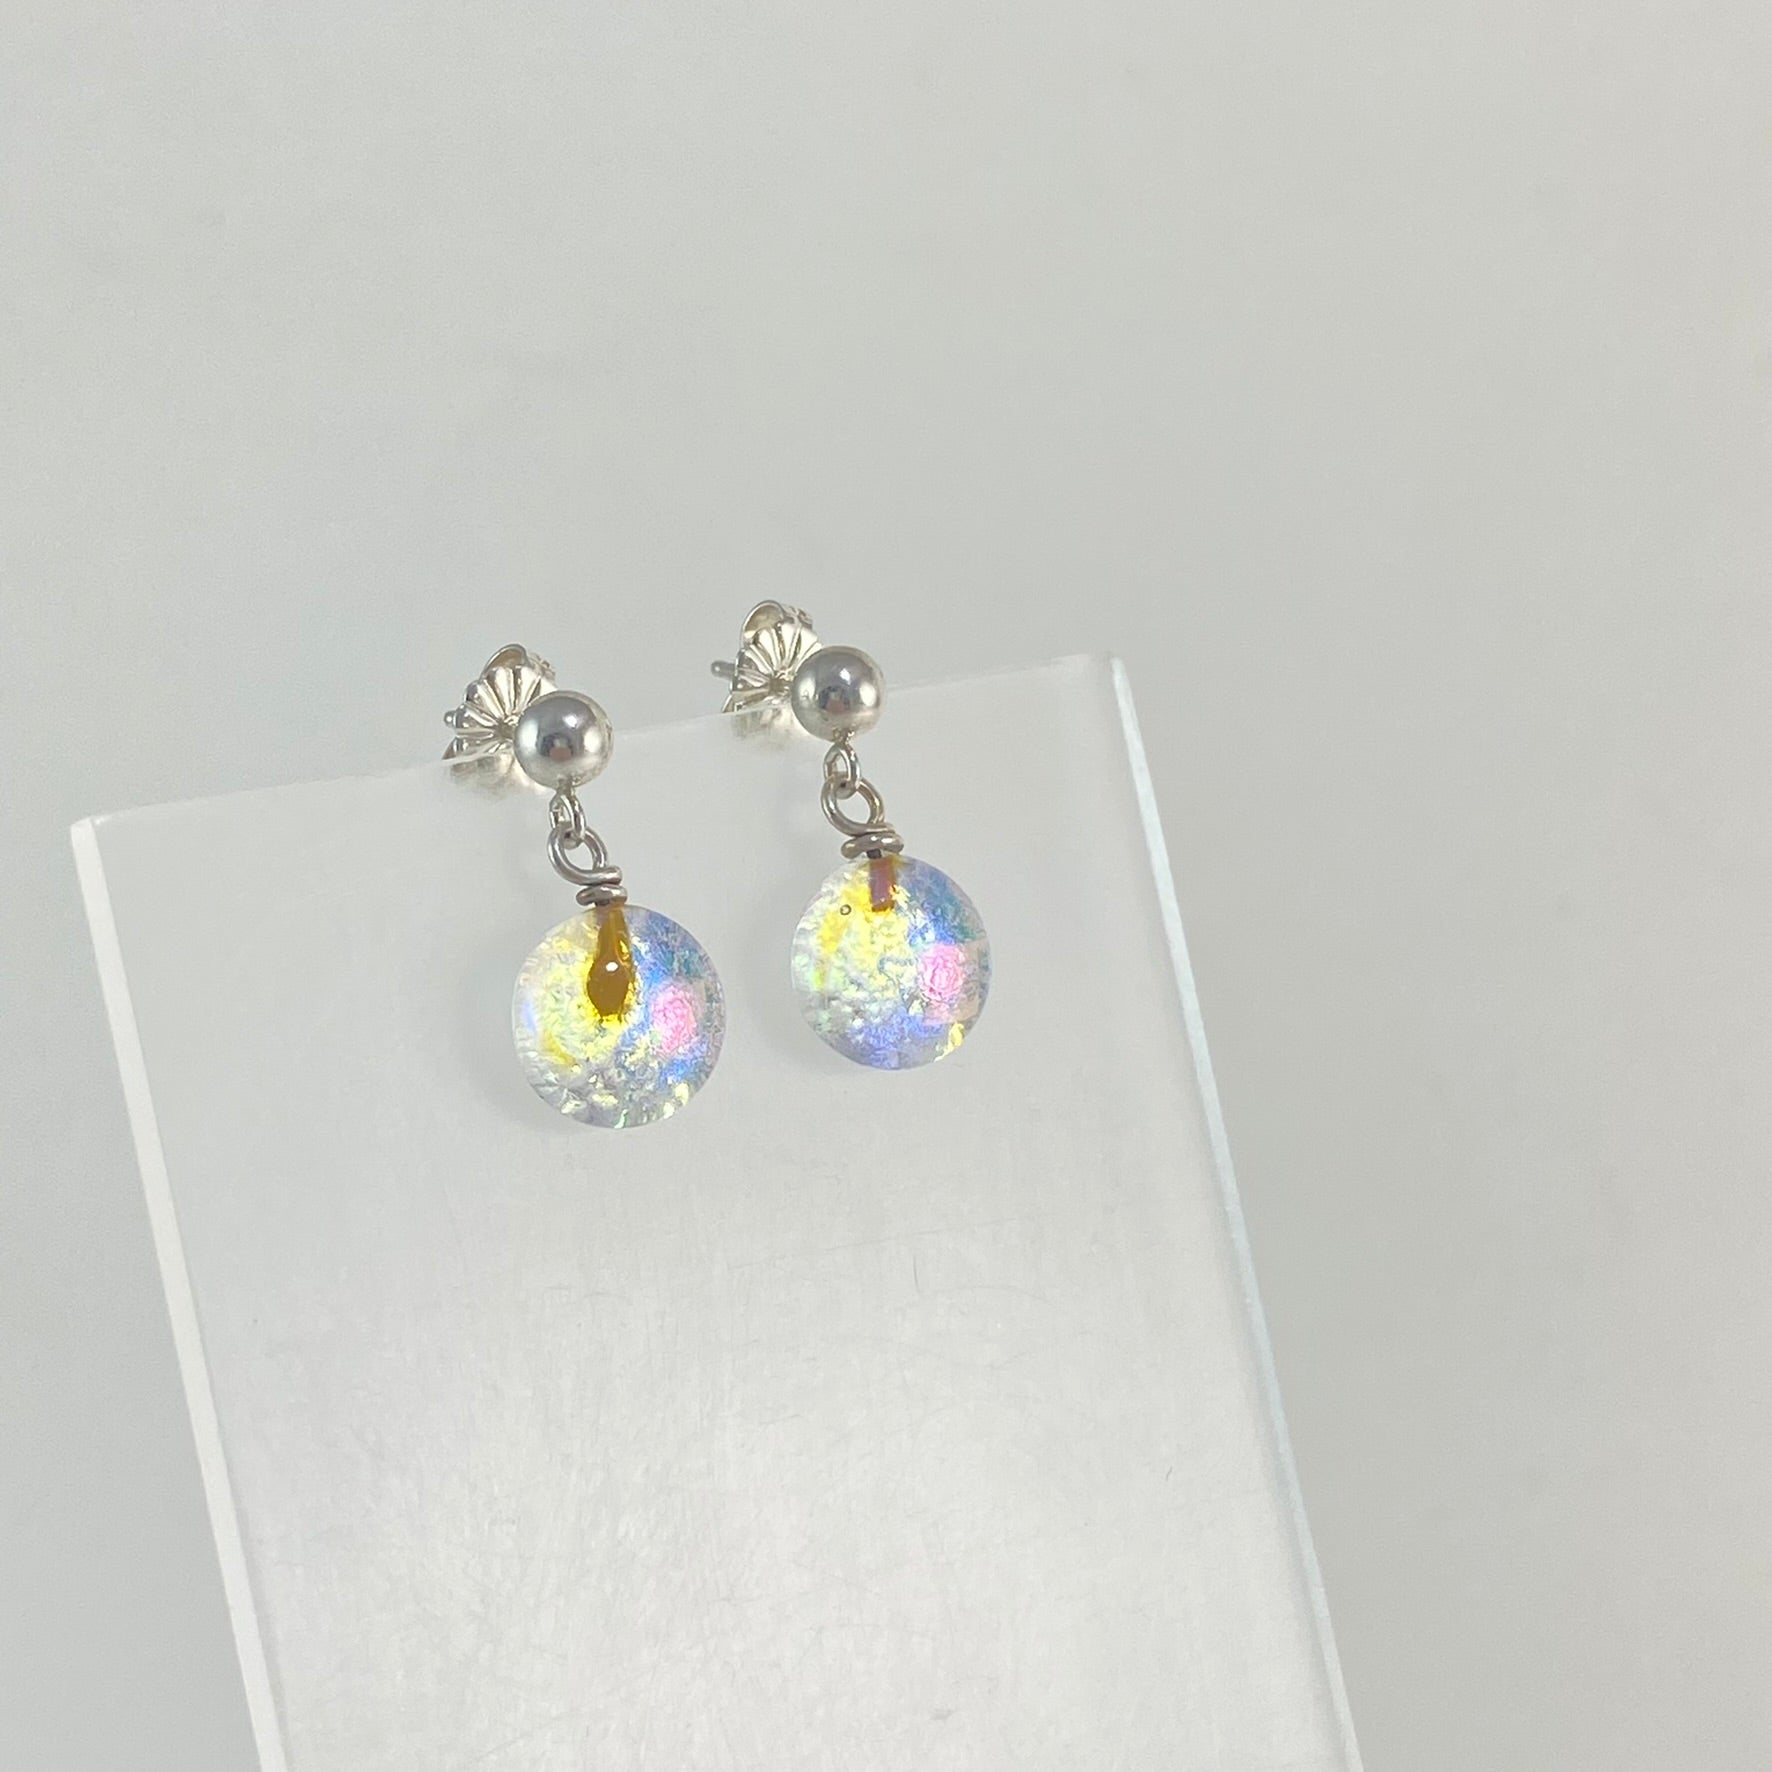 Space Ball Earrings in Double Dichroic